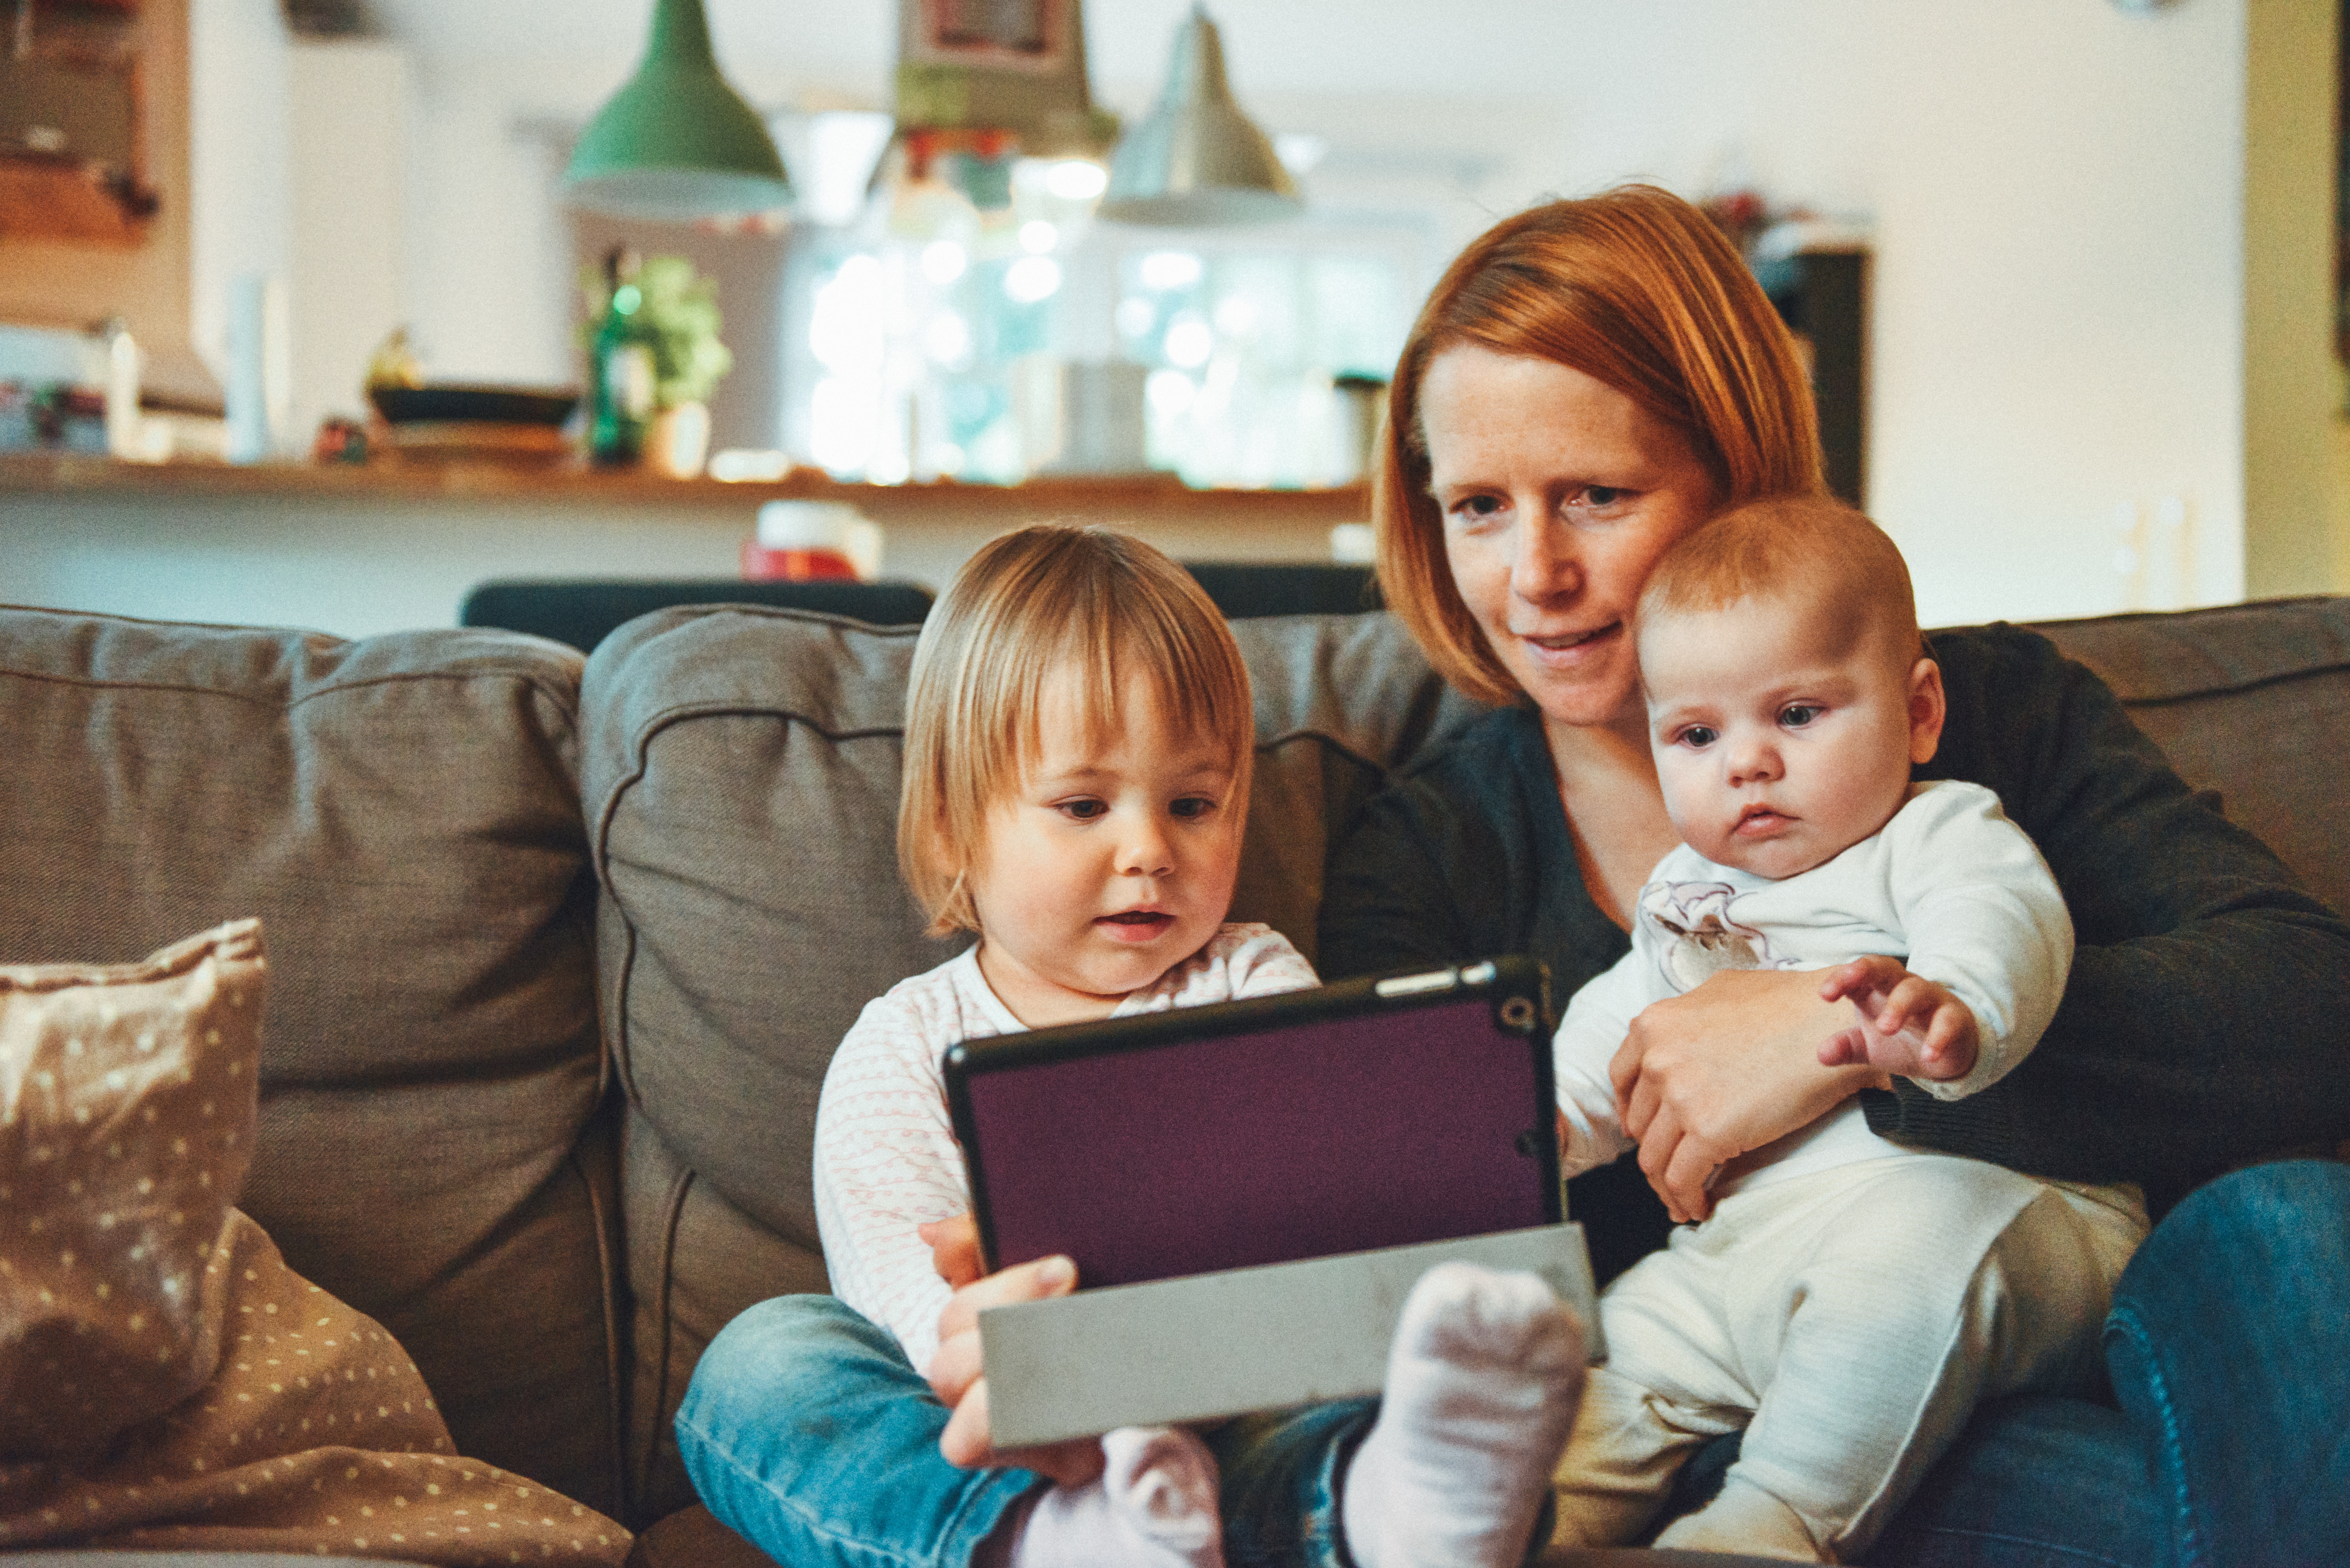 Mom with baby and toddler sitting on a couch inside their home looking at a touch screen device.